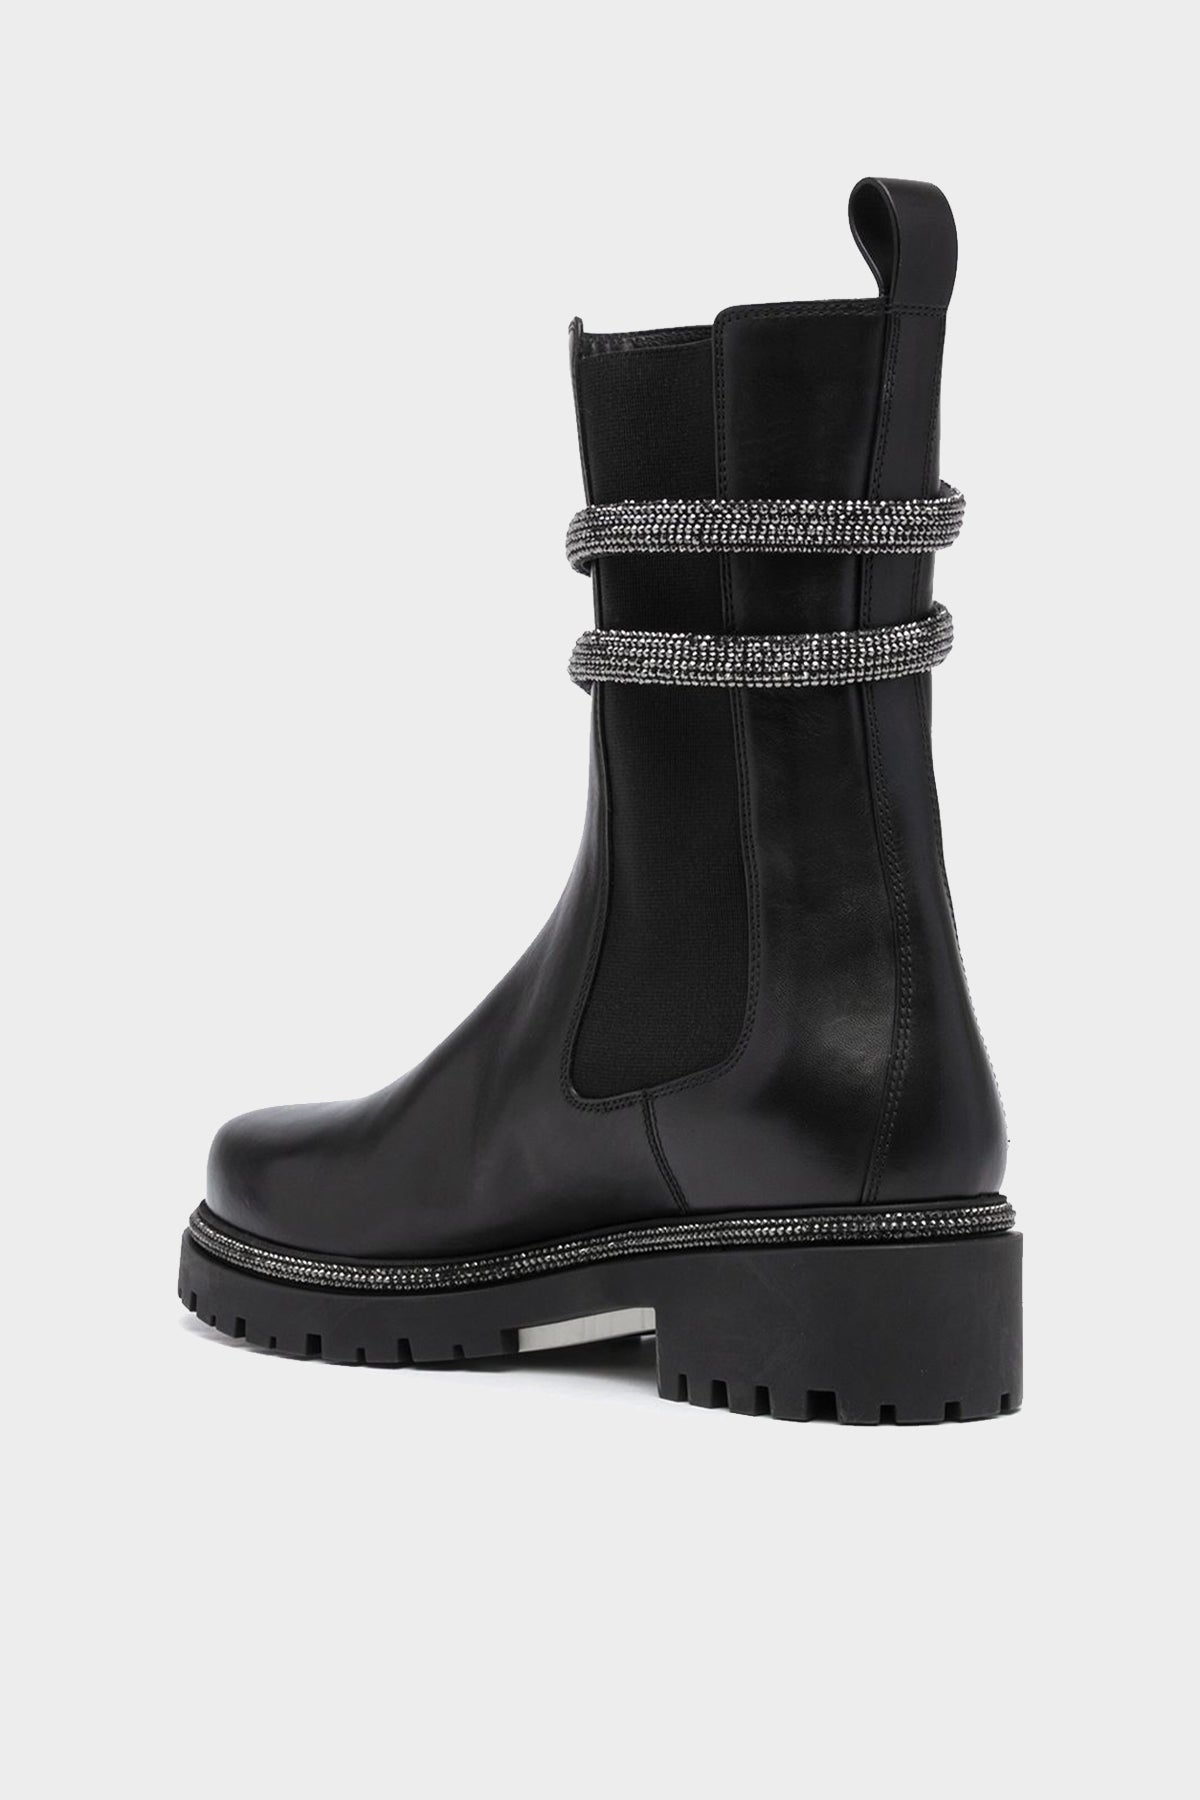 Cleo Leather Ankle Boots in Black - shop-olivia.com